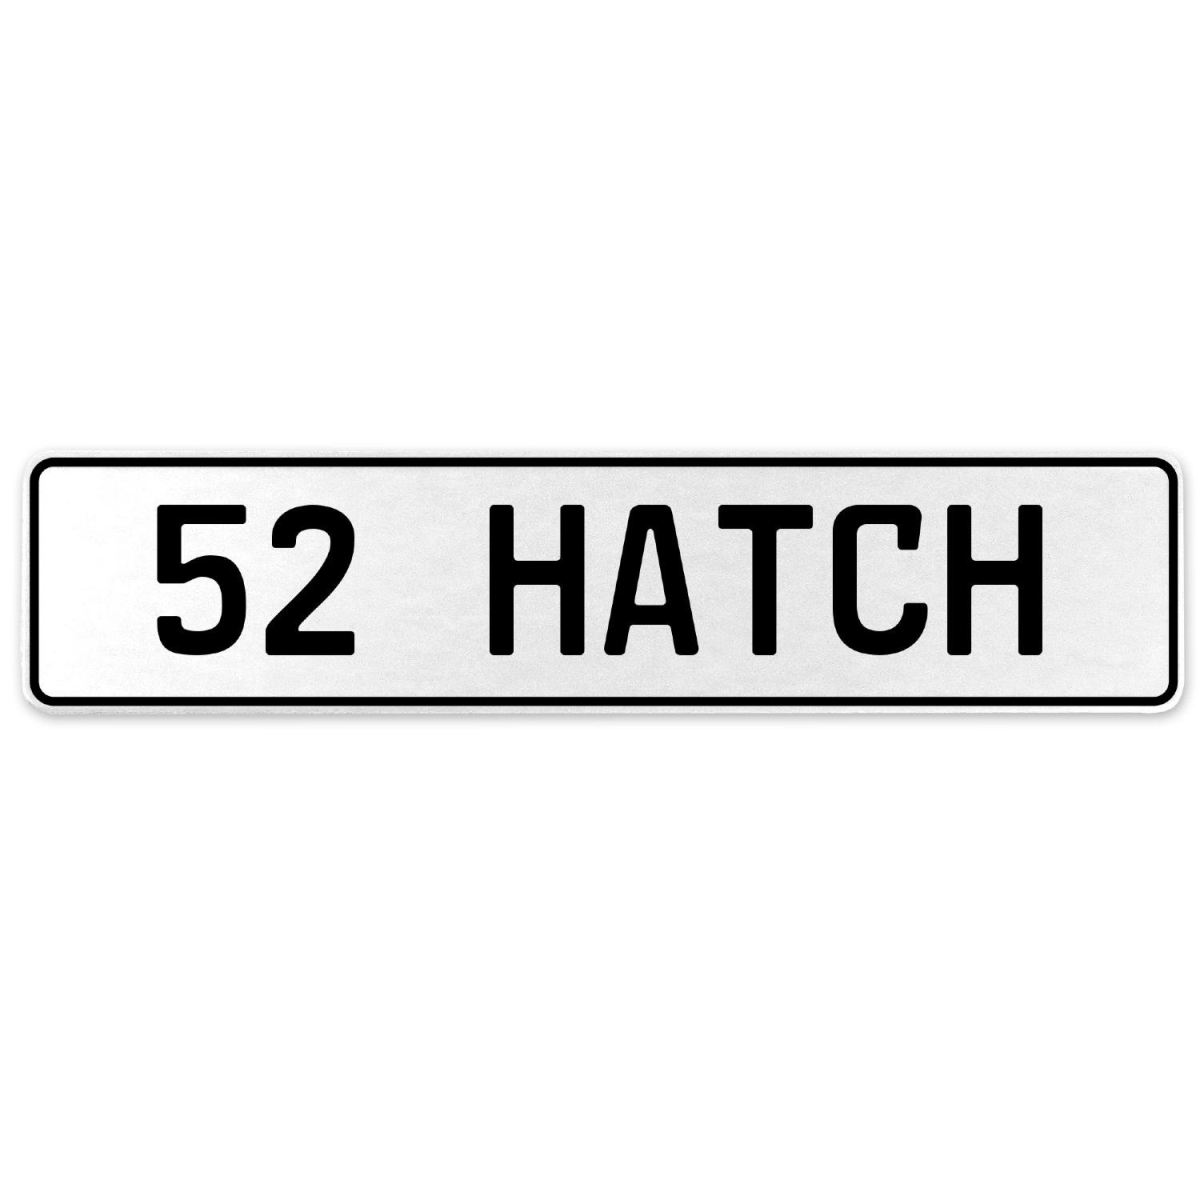 52 Hatch - White Aluminum Street Sign Mancave Euro Plate Name Door Sign Wall